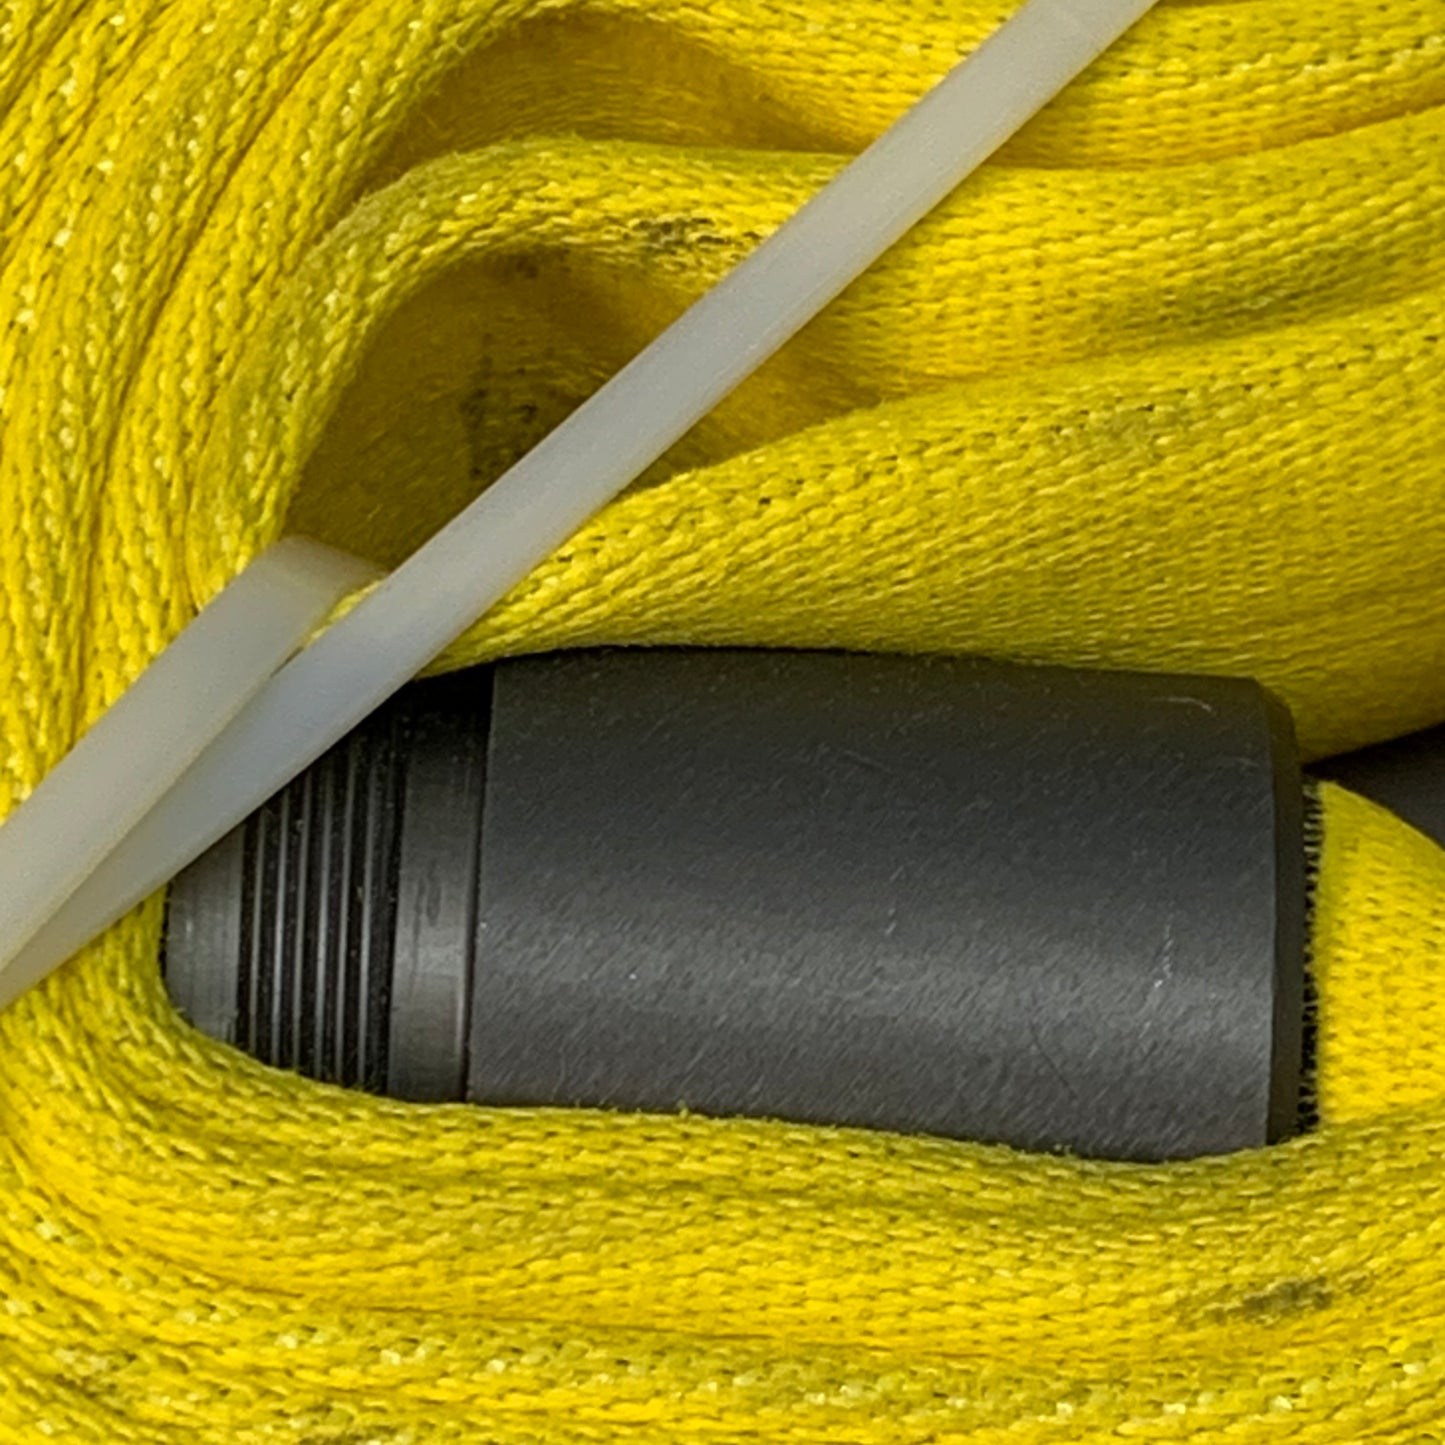 FIRE HOSE DIRECT NAFH Double Jacket Industrial Polyester Hose 1" x 50' Yellow 300PSI (New)